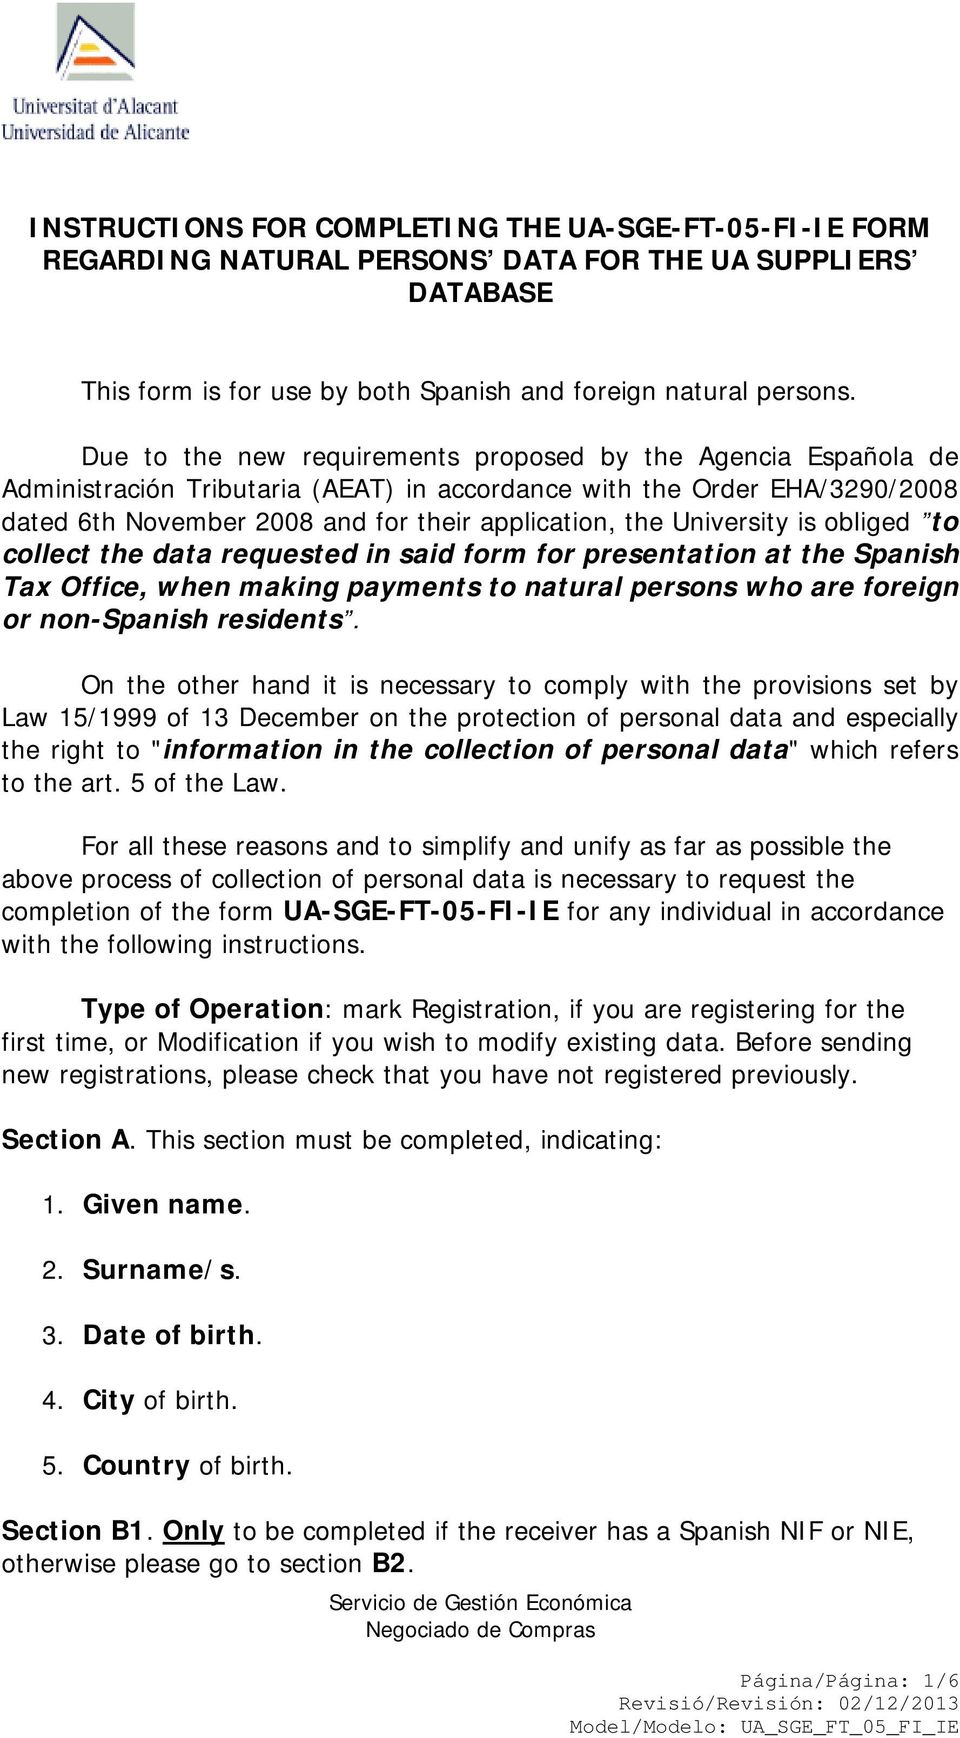 University is obliged to collect the data requested in said form for presentation at the Spanish Tax Office, when making payments to natural persons who are foreign or non-spanish residents.